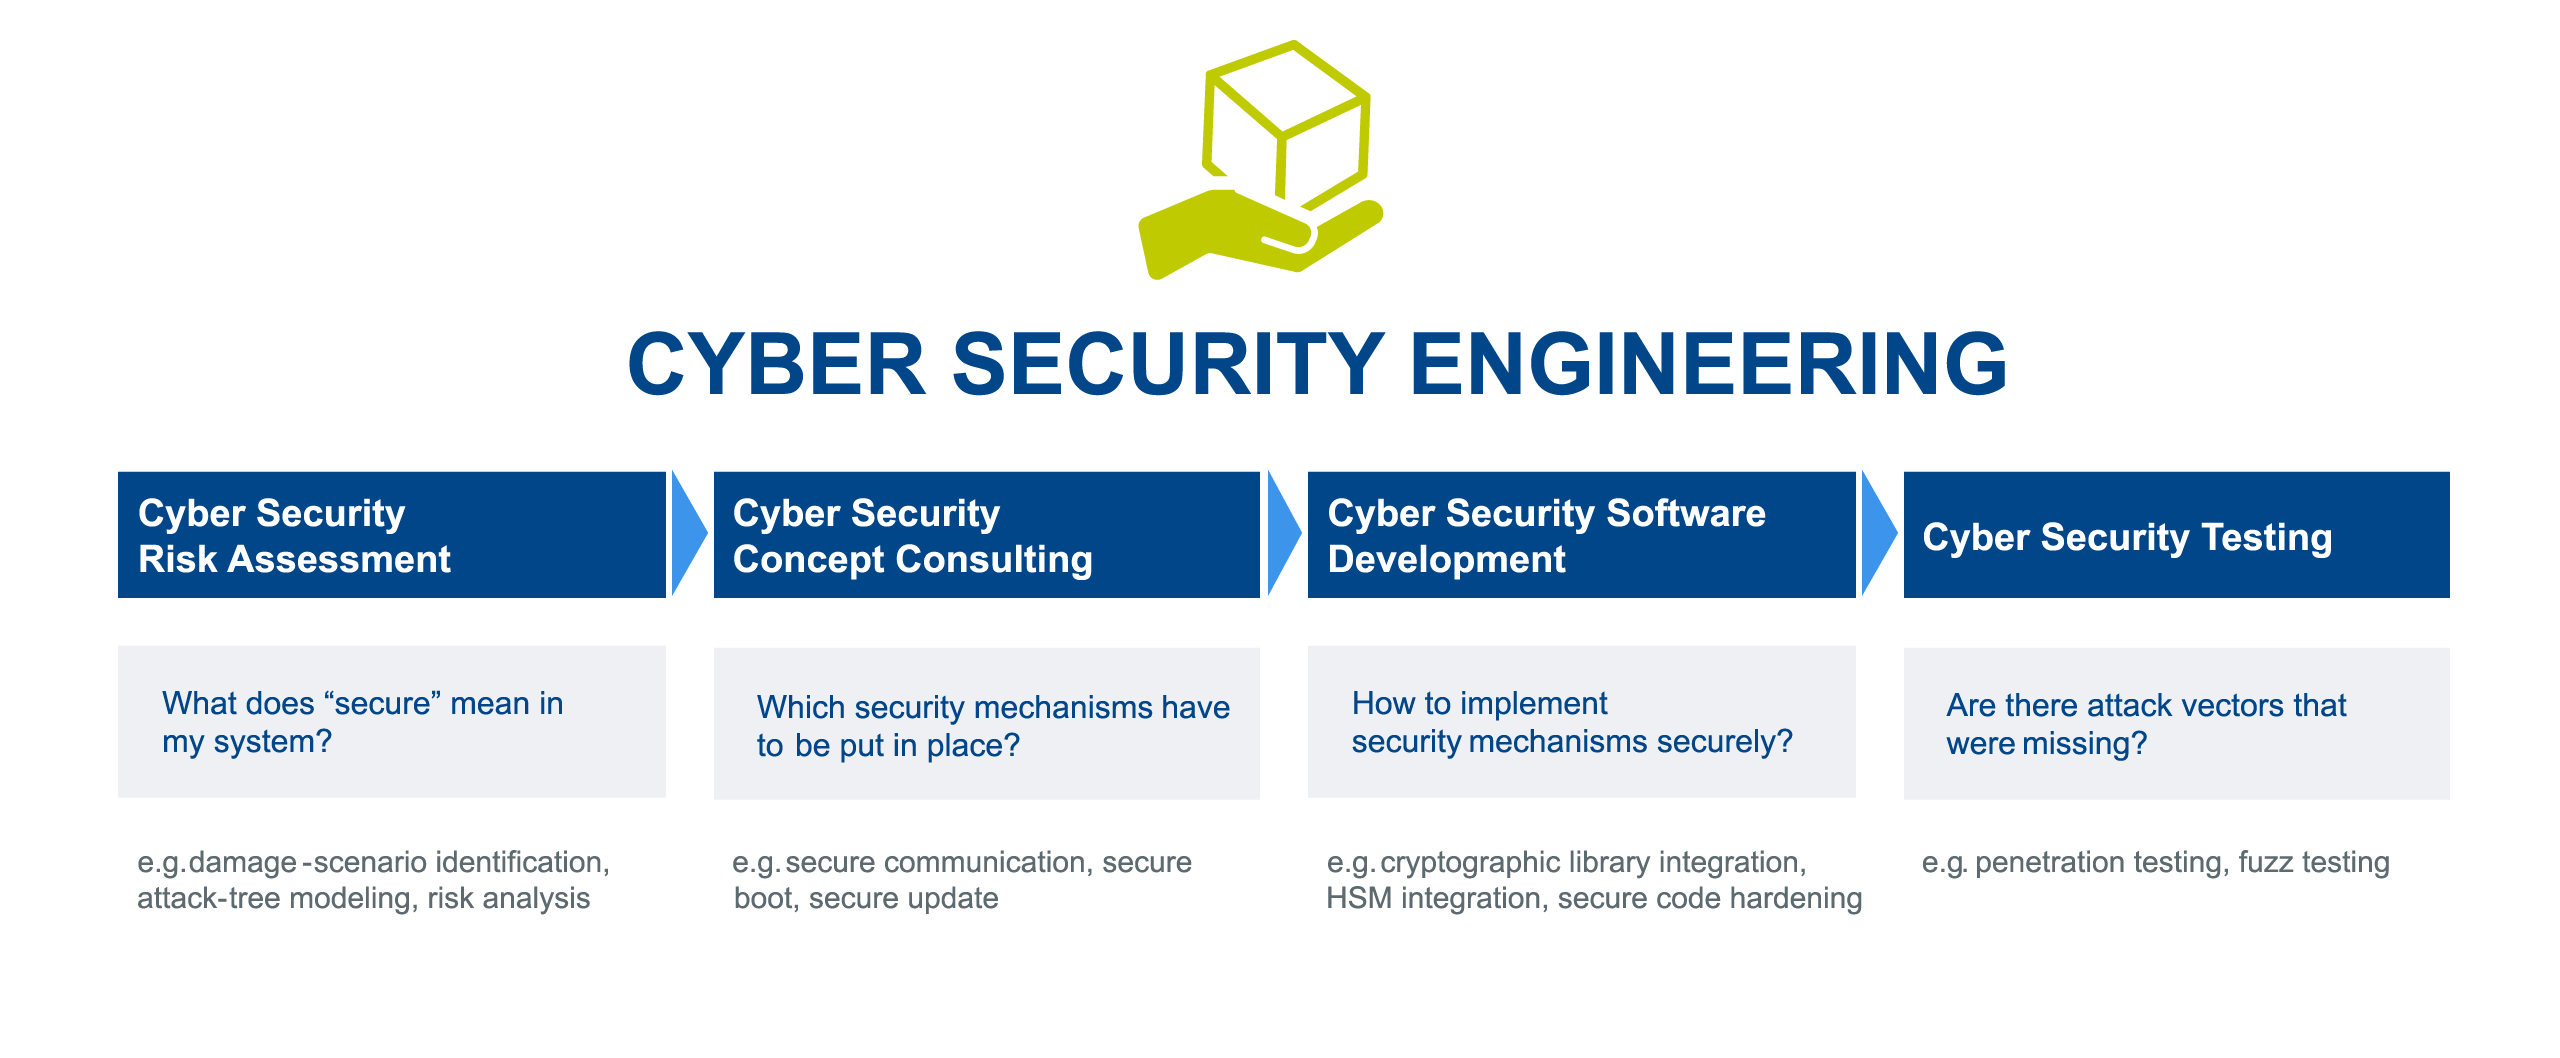 Infographic about ITK Engineering's services in the field of cyber security engineering: from risk assessment to concept consulting, software development and testing.